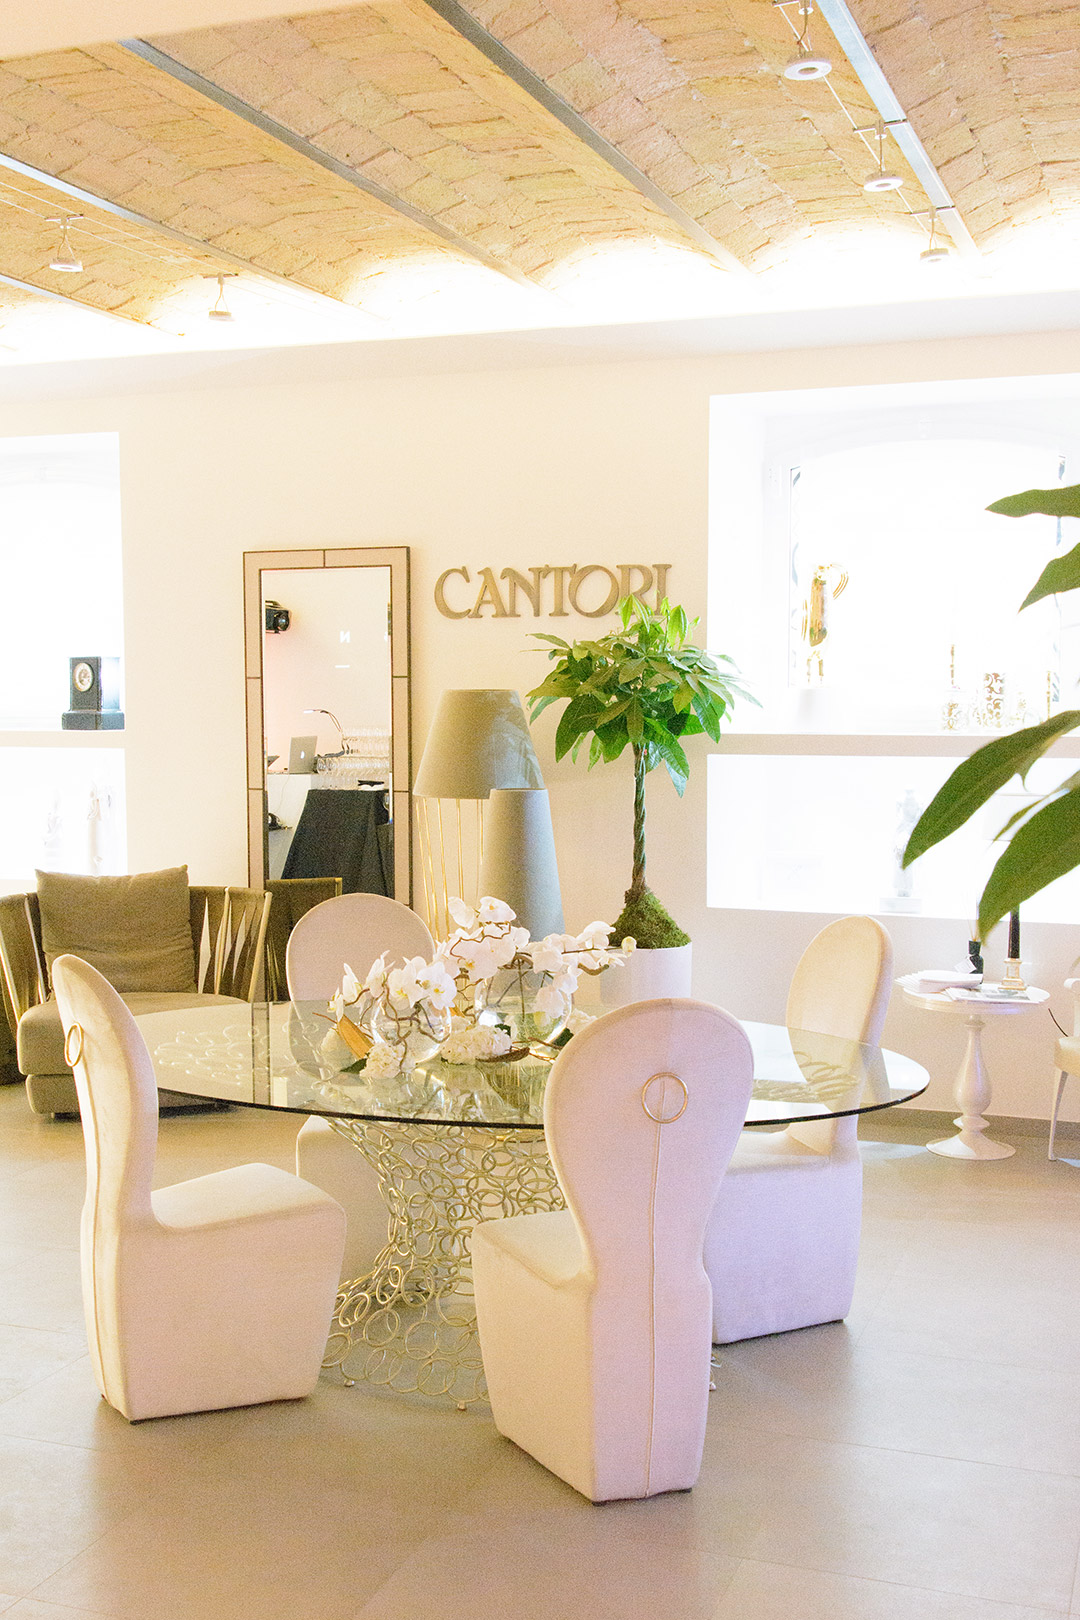 05/07/2016 Showroom opening: THESIGN GALLERY - Cantori